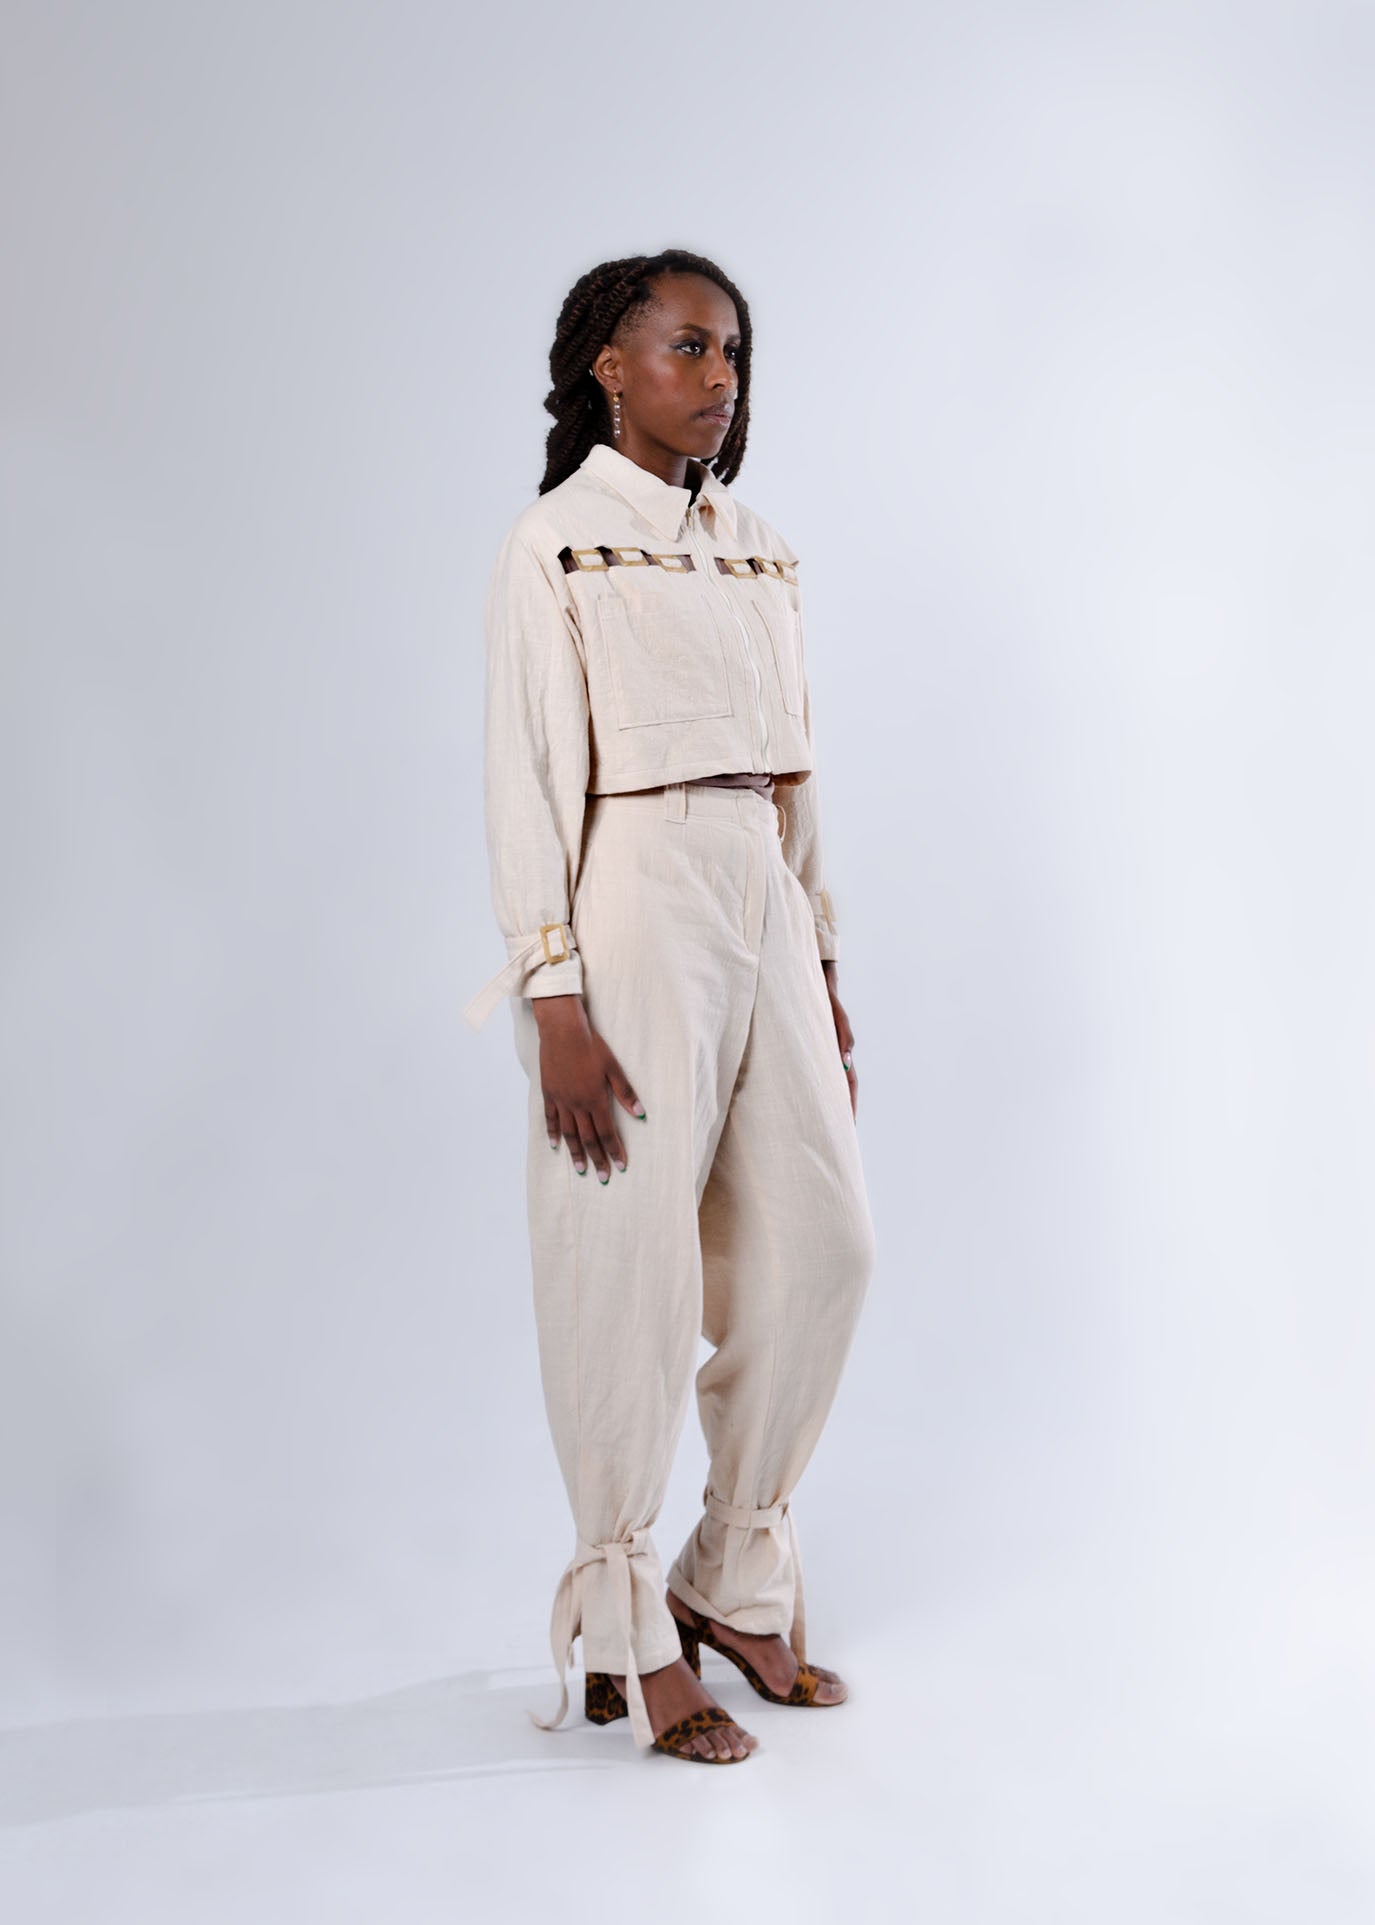 Model wears matching cream outfit. Long sleeve cropped jacket with centre front exposed zipper, chest pockets and cutout details. High waisted pants, tied at the ankles